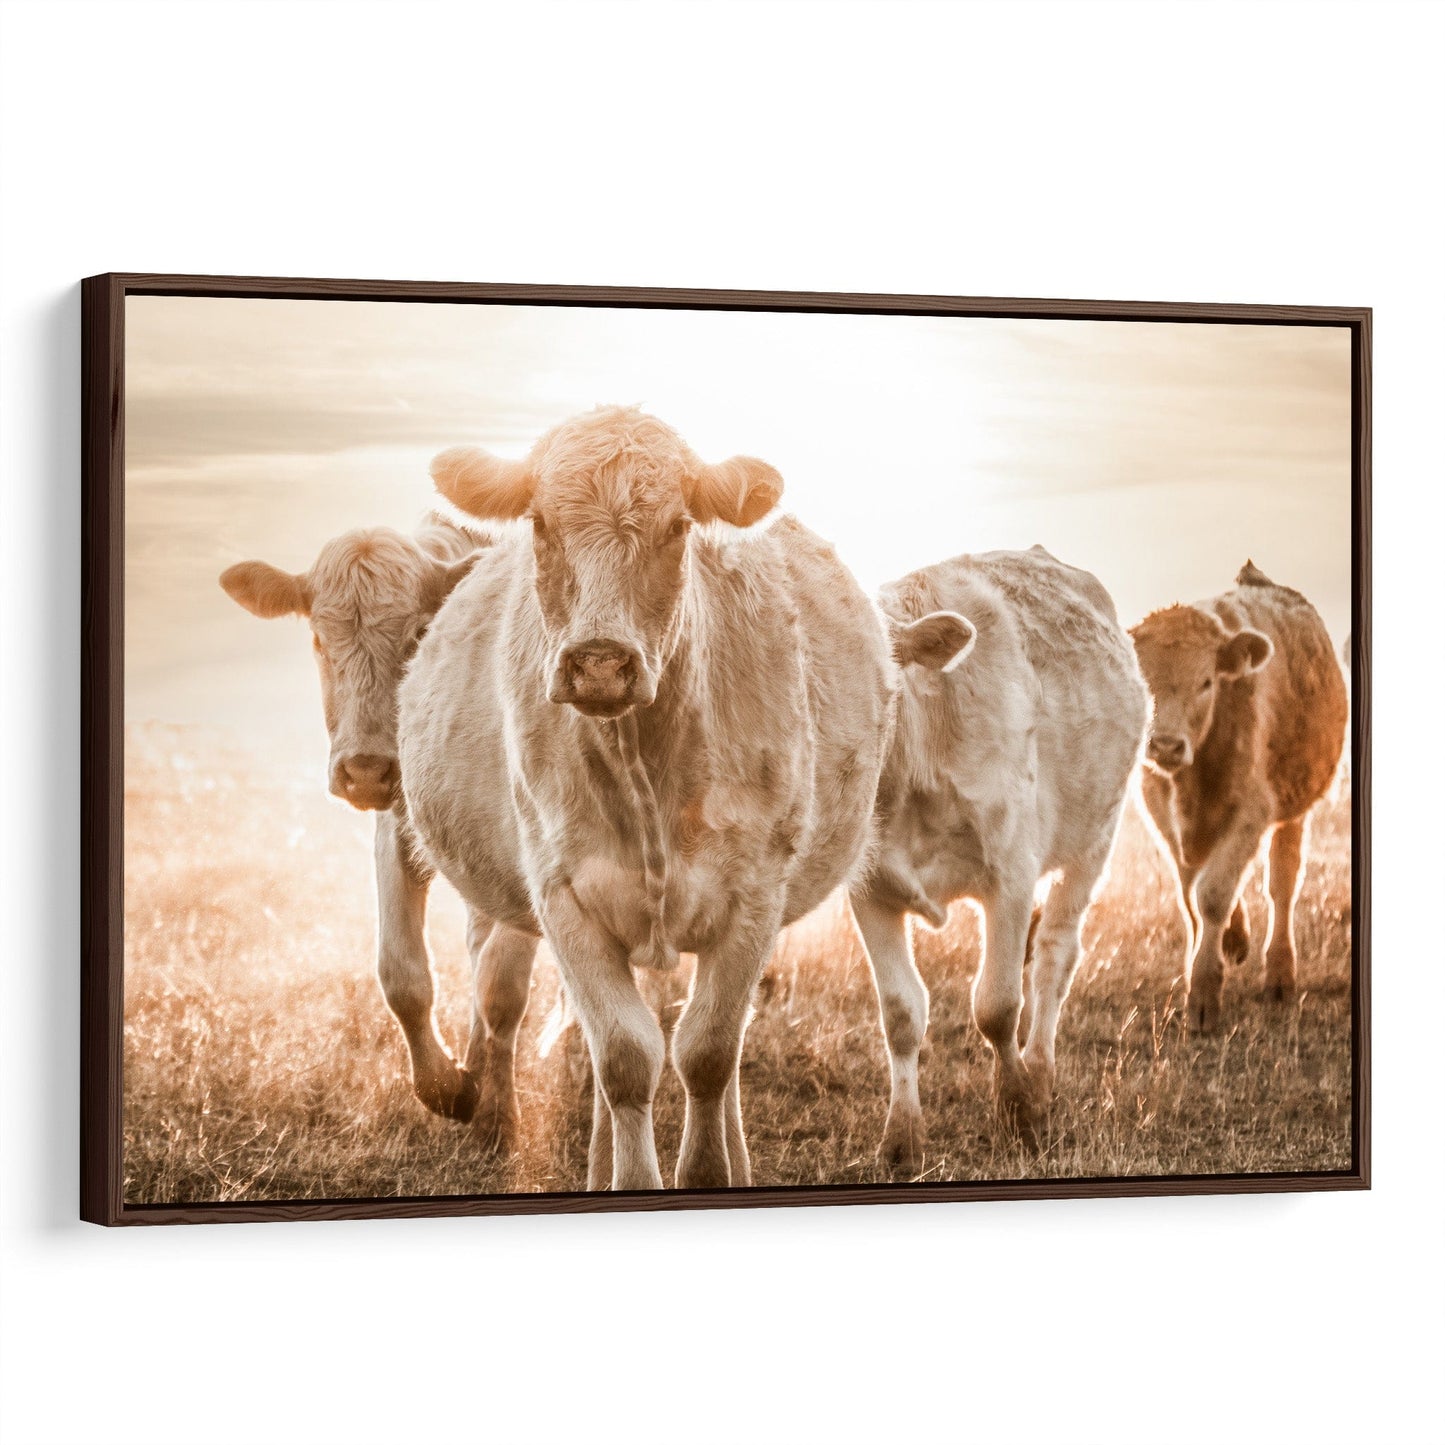 Charolais Cattle Wall Canvas Canvas-Walnut Frame / 12 x 18 Inches Wall Art Teri James Photography